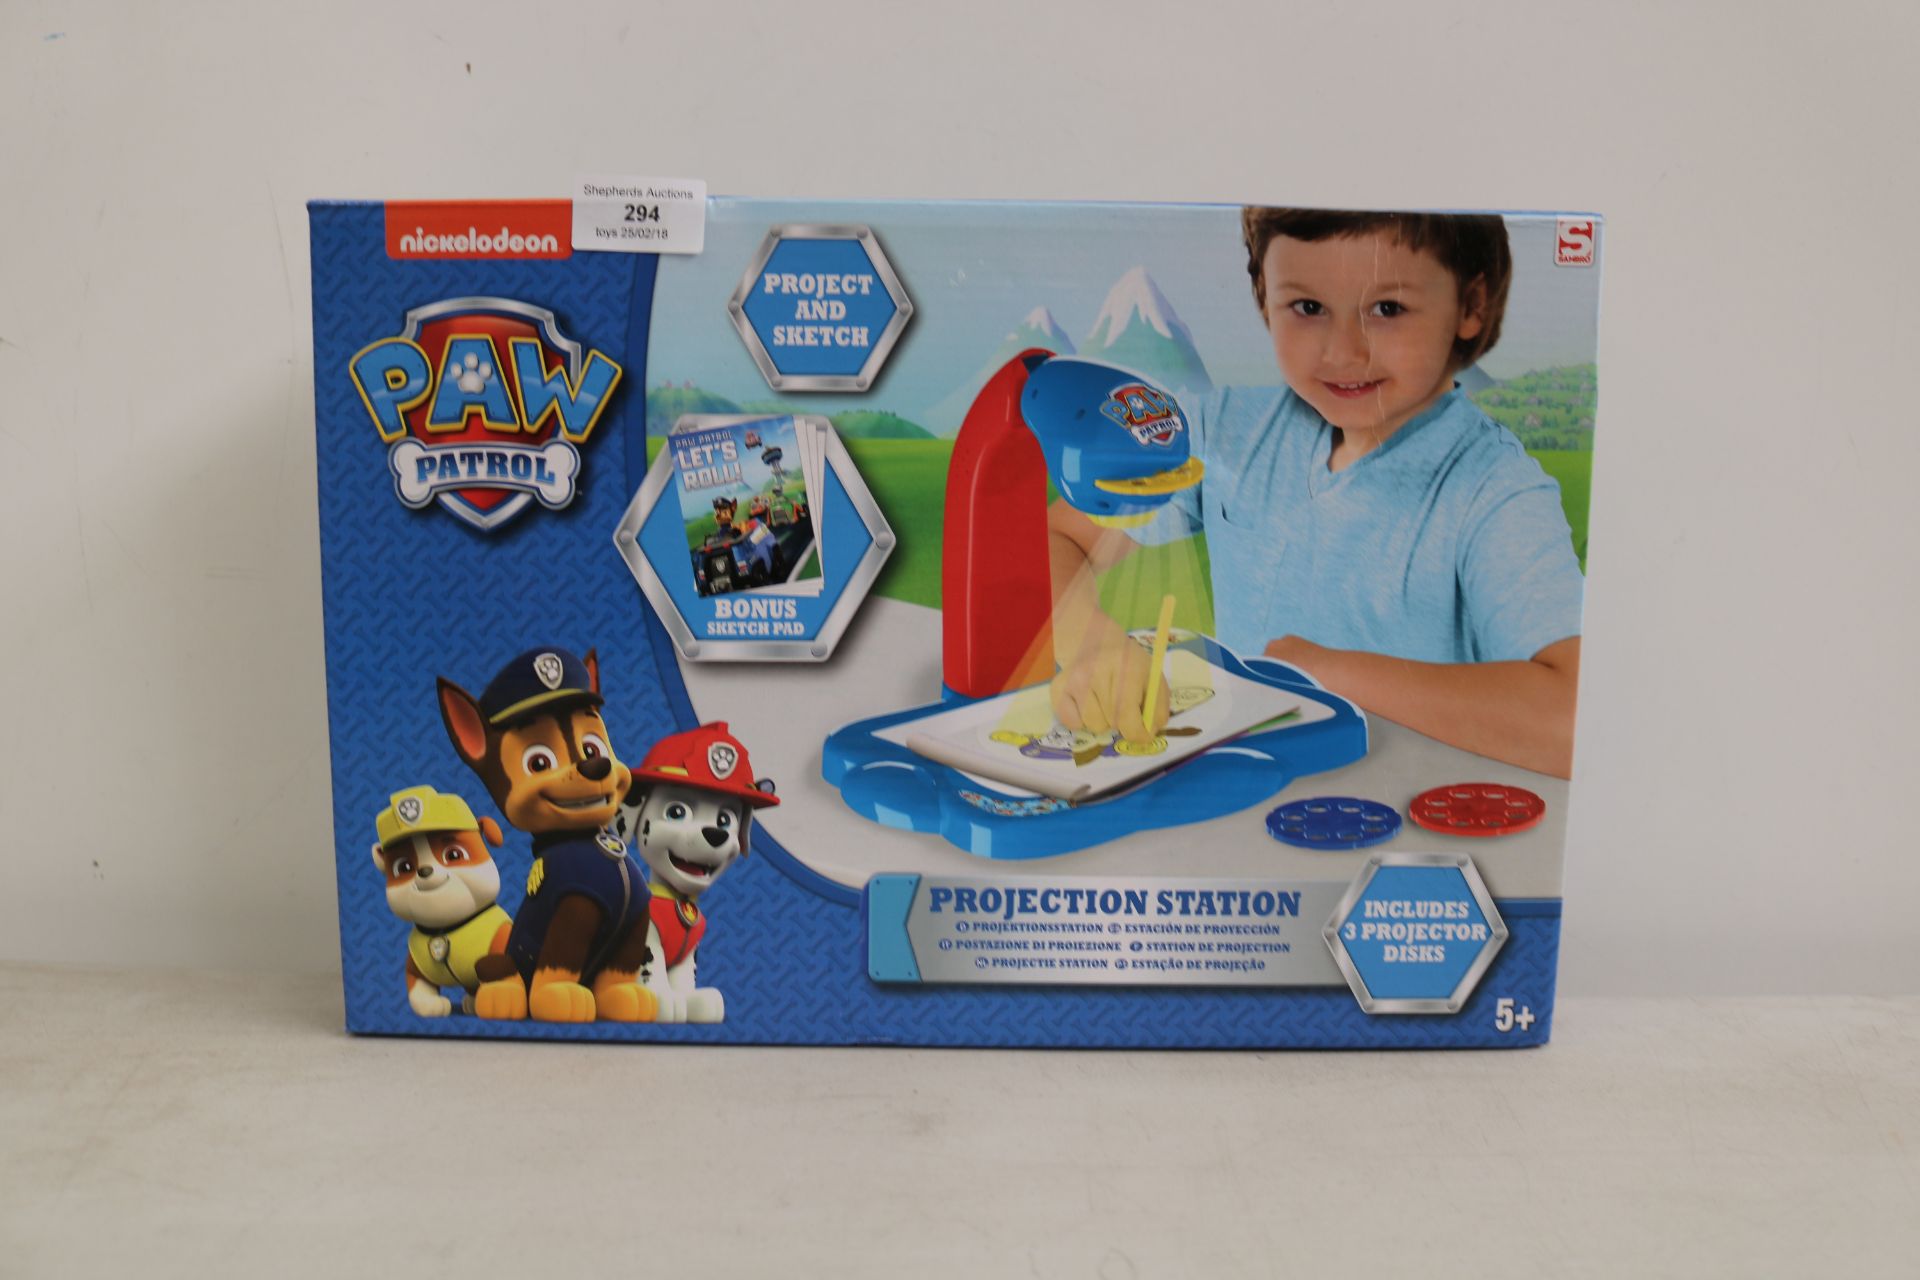 Nickelodeon Paw Patrol projection station, new and boxed.